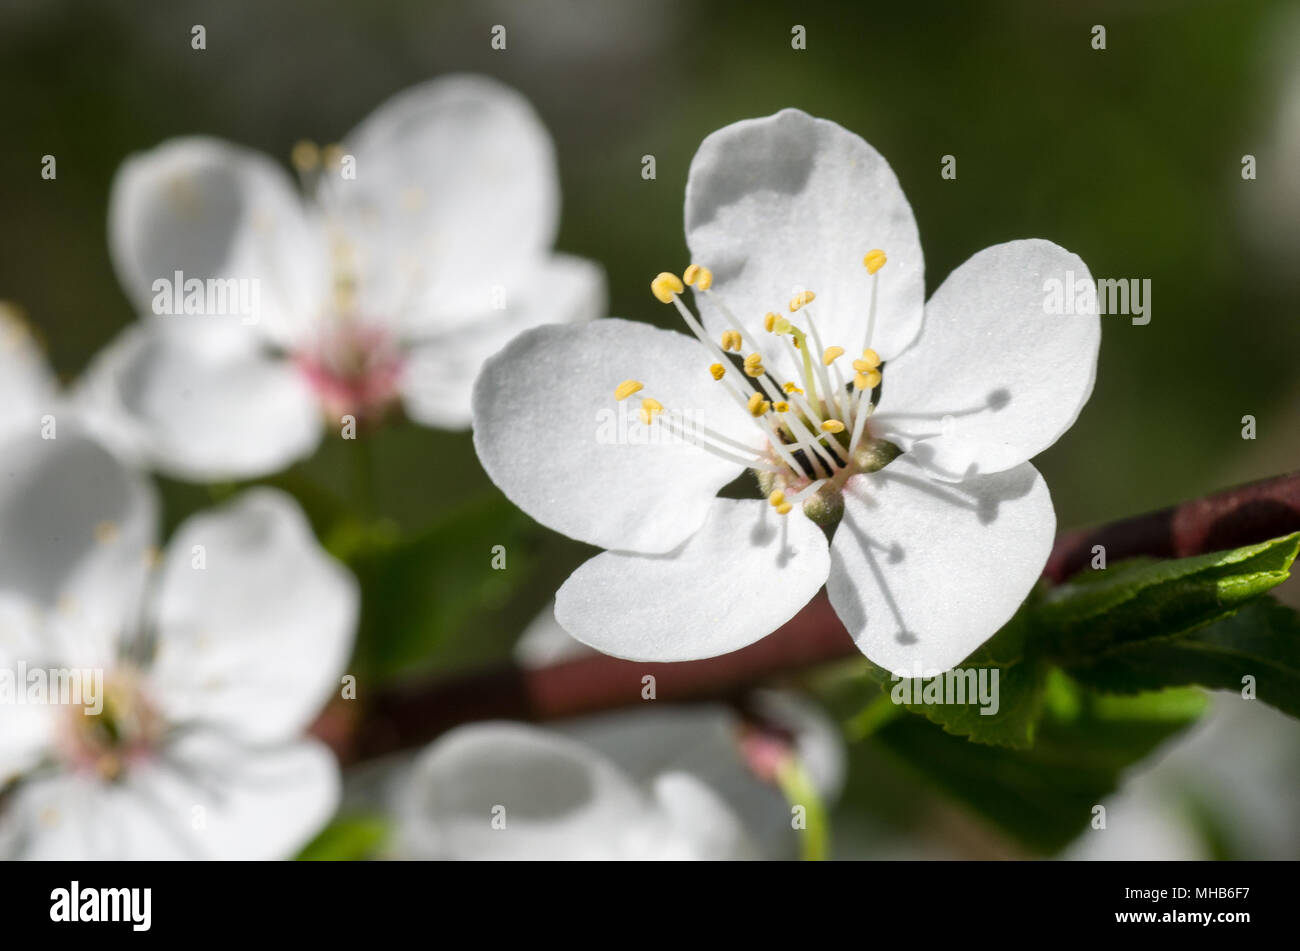 Blooming wild plum tree in daylight. White flowers in small clusters on a wild plum tree branch. Stock Photo